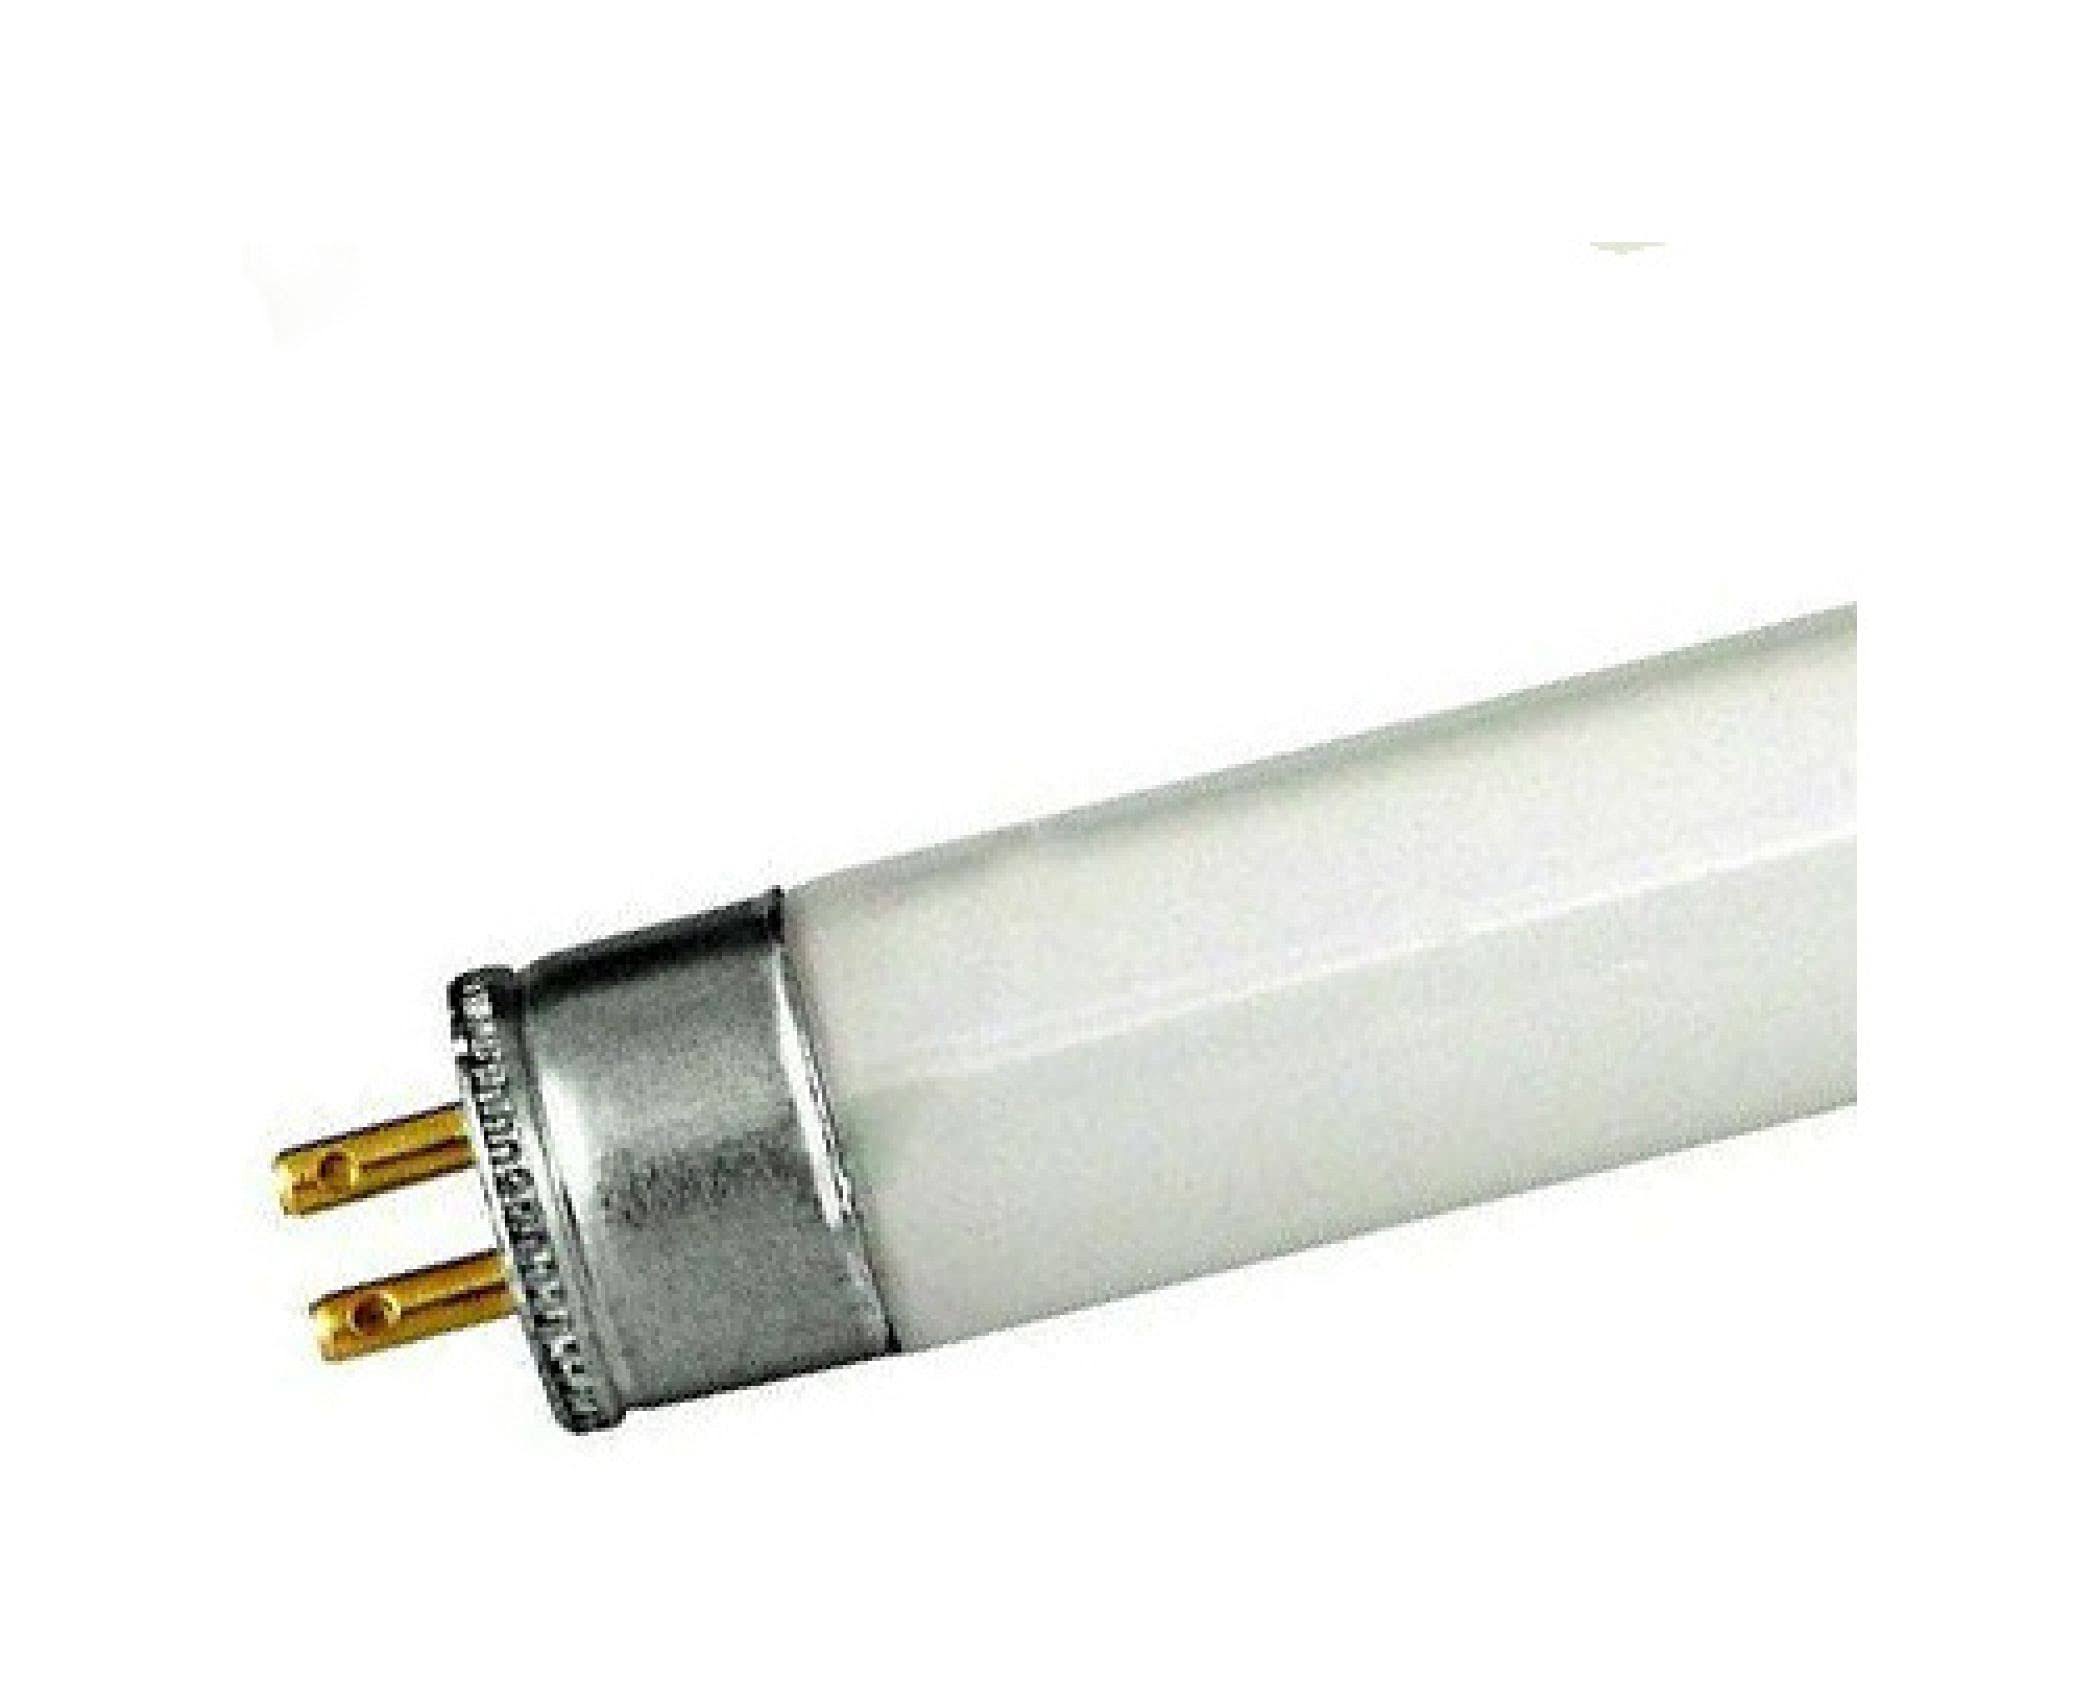 6W T4 Fluorescent Tube (3400K, 217mm Inc Pins, 205mm Excl Pins)